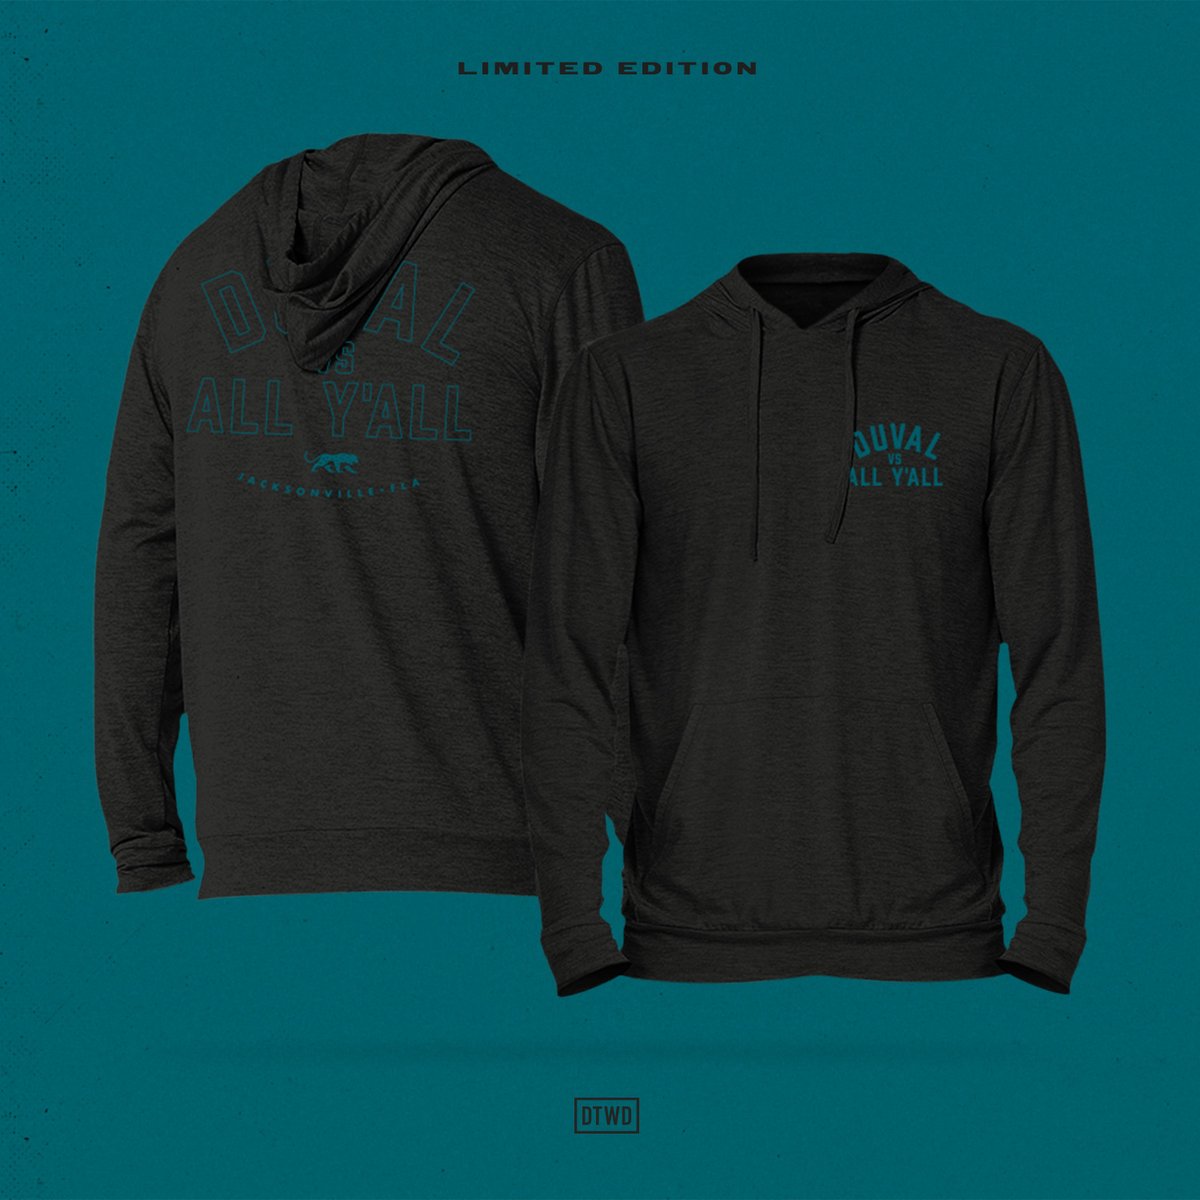 Image of Duval vs All Yall - lightweight hoodie